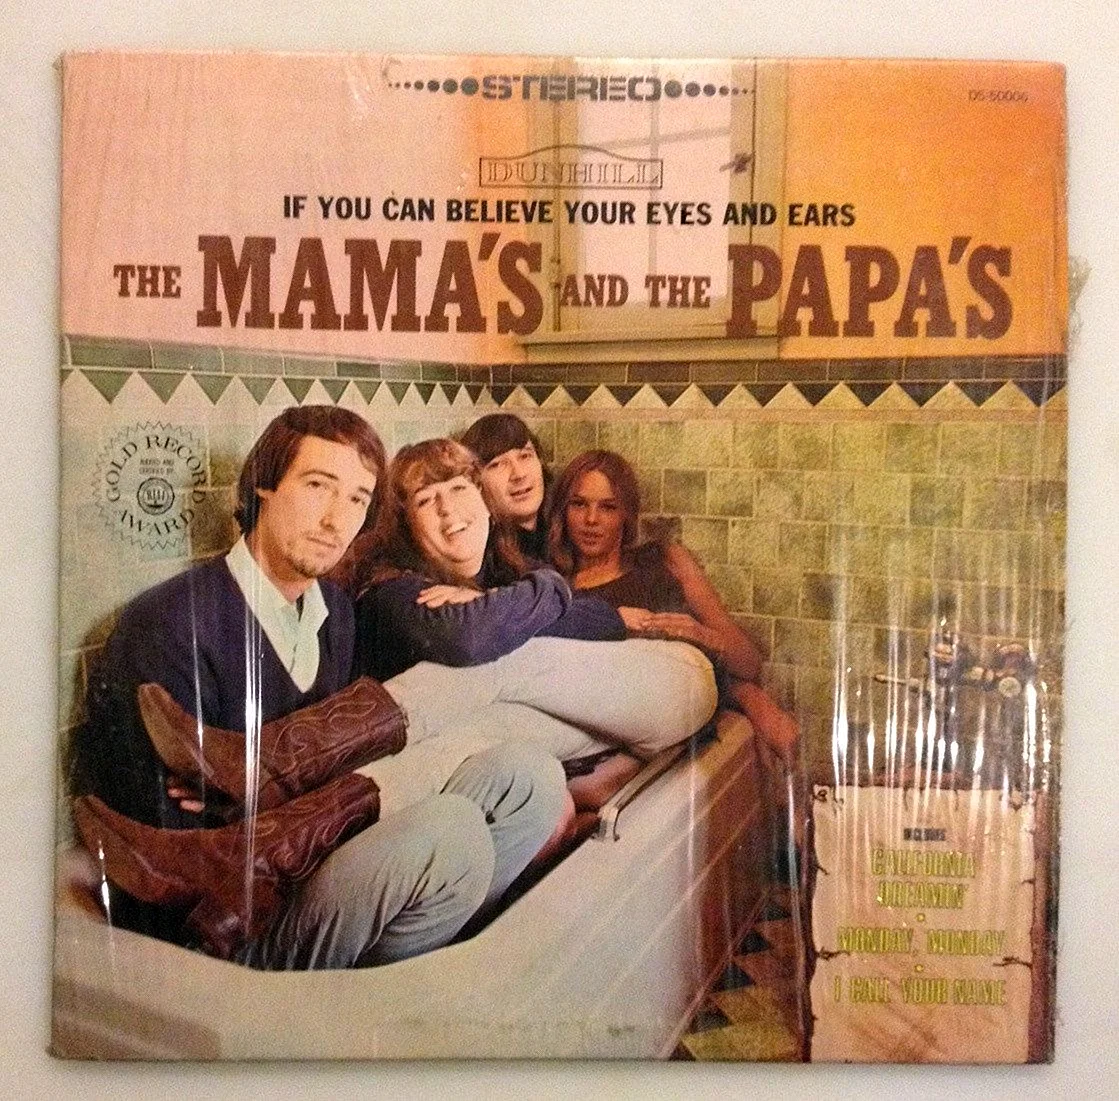 The Mamas And The Papas – If You Can Believe Your Eyes And Ears Wallpaper